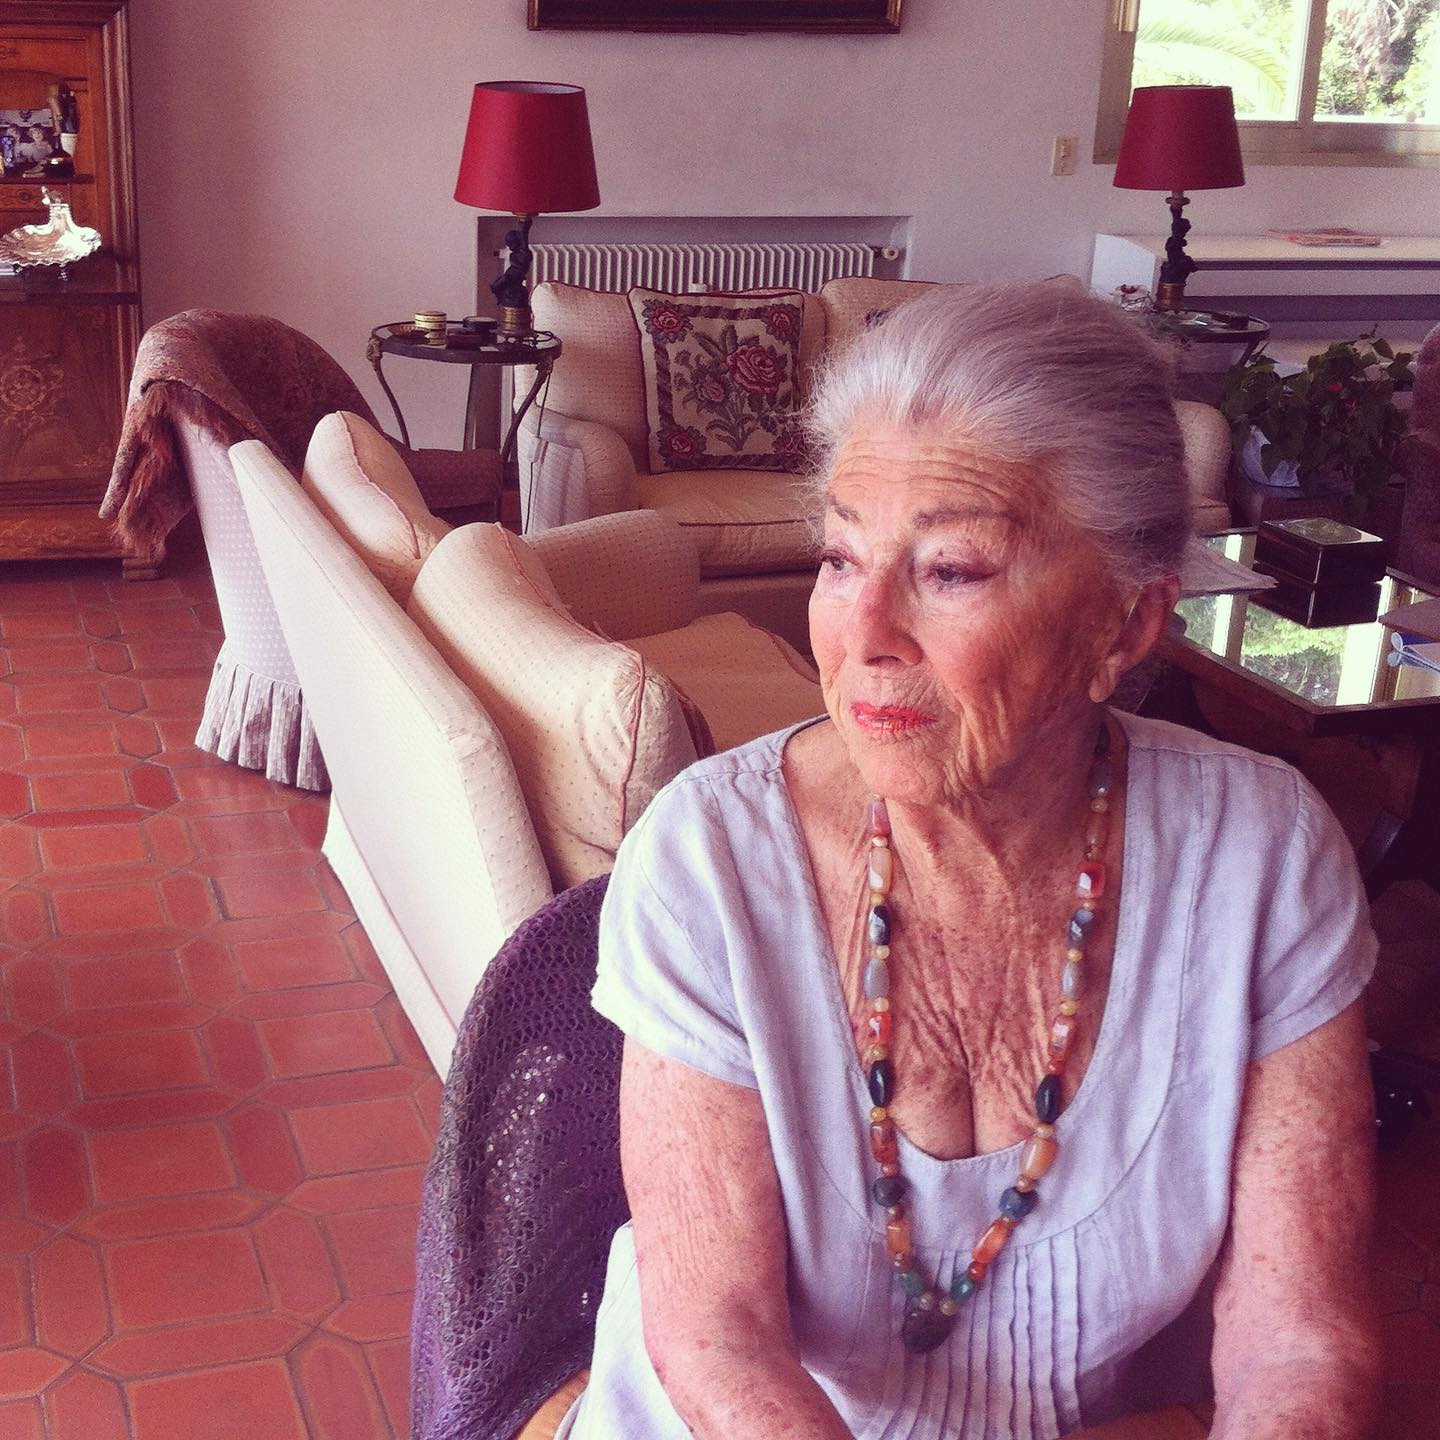 Remembering the extraordinary and beautiful life of Mme Lucienne Frey, who recently left us aged 108. We had the privilege of profiling her at a mere 100, when she shared her keys to making it so far so well. Please find the post here: 
https://frenchlessonsblog.com/profile-madame-lucienne-frey-centenarian/
#antibes
#antibeshistory 
#cotedazur 
#worldwar1history 
#pierrefrey 
#scrabble 
#goodgenes 
#keystoalonglife